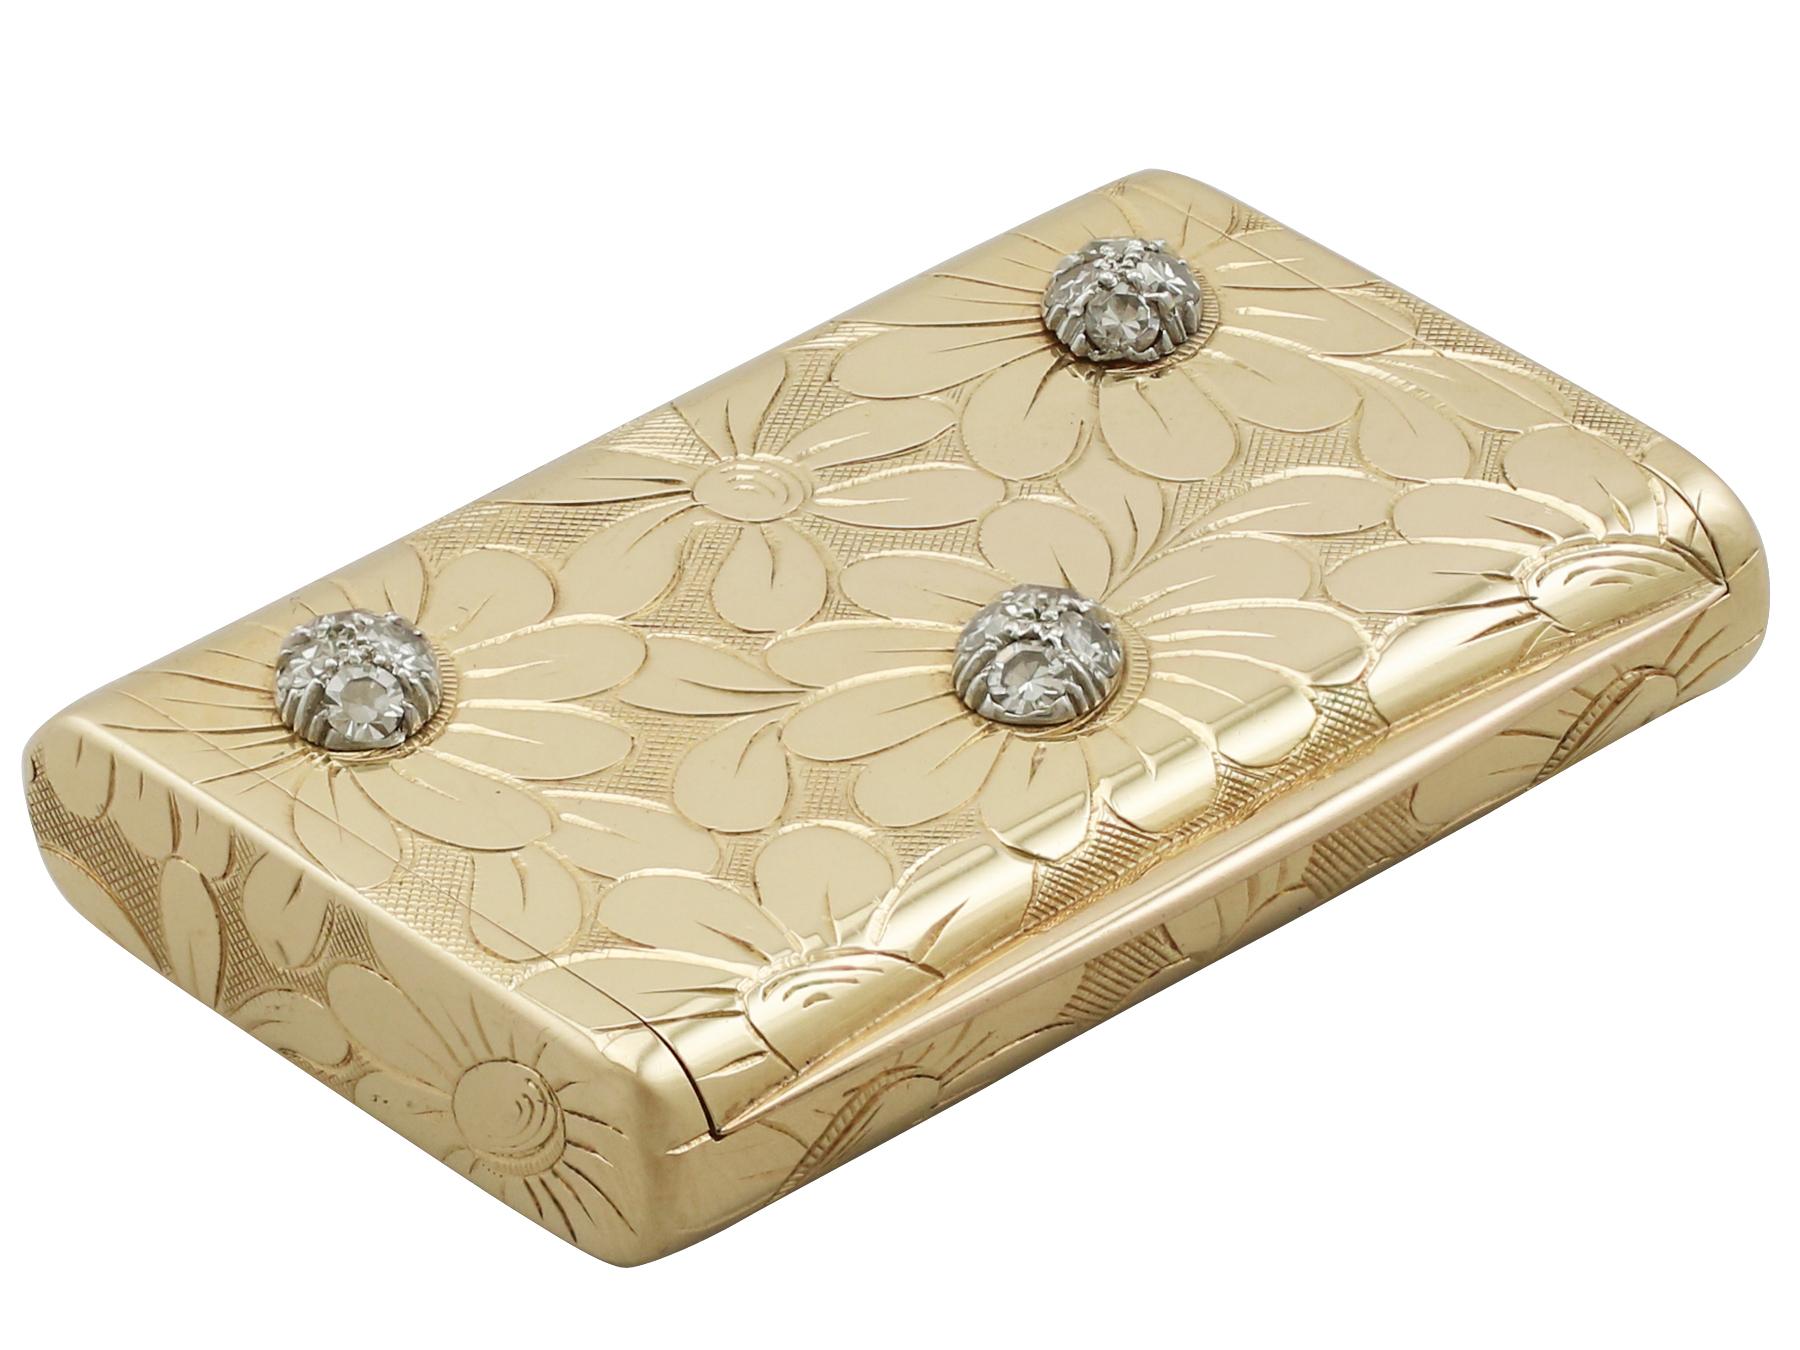 An exceptional, fine and impressive vintage French 18-karat yellow gold box by Van Cleef & Arpels; an addition to our diverse ornamental collection.

This exceptional vintage French 18 karat yellow gold box has a rectangular, rounded form.

The